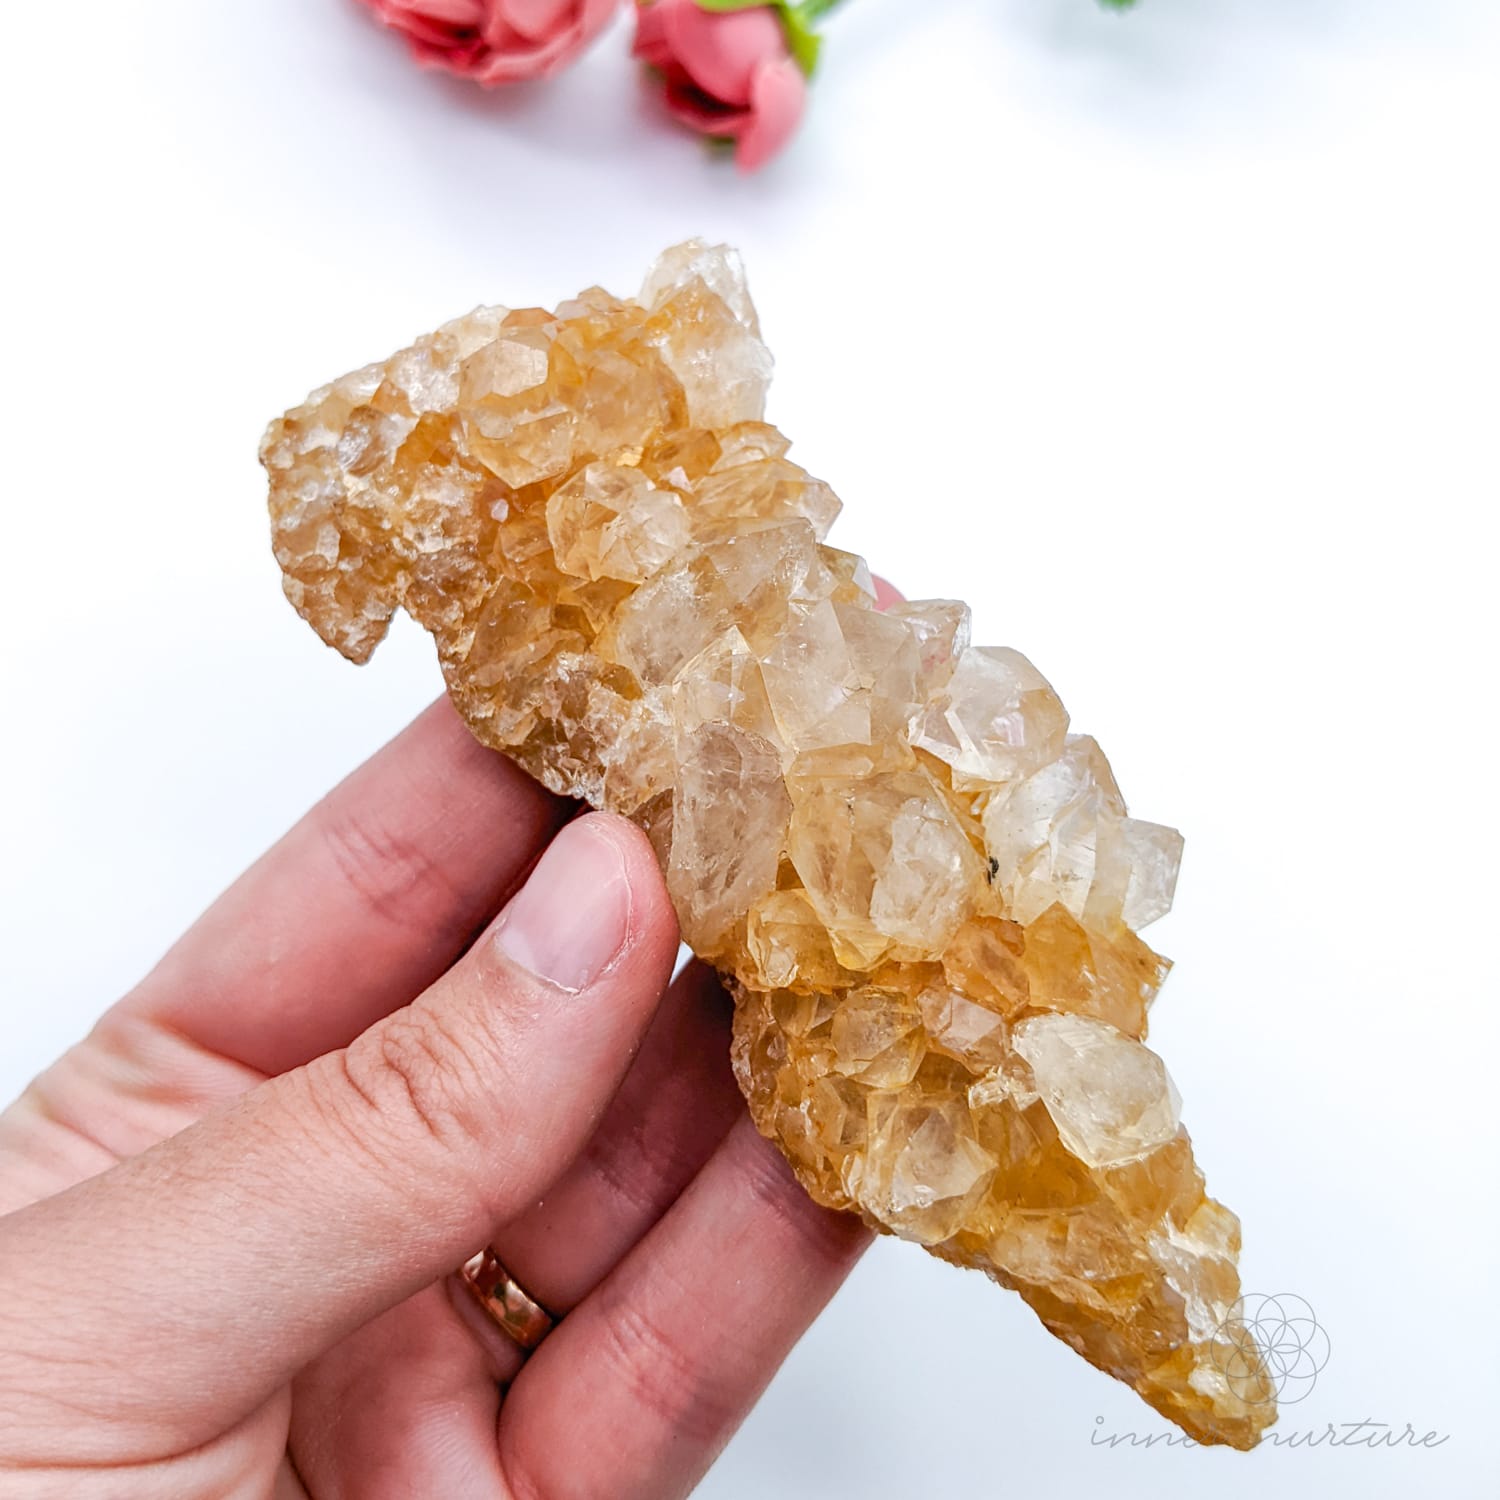 Clear Quartz Cluster With Inclusions - #1 | Crystal Shop Australia - Inner Nurture